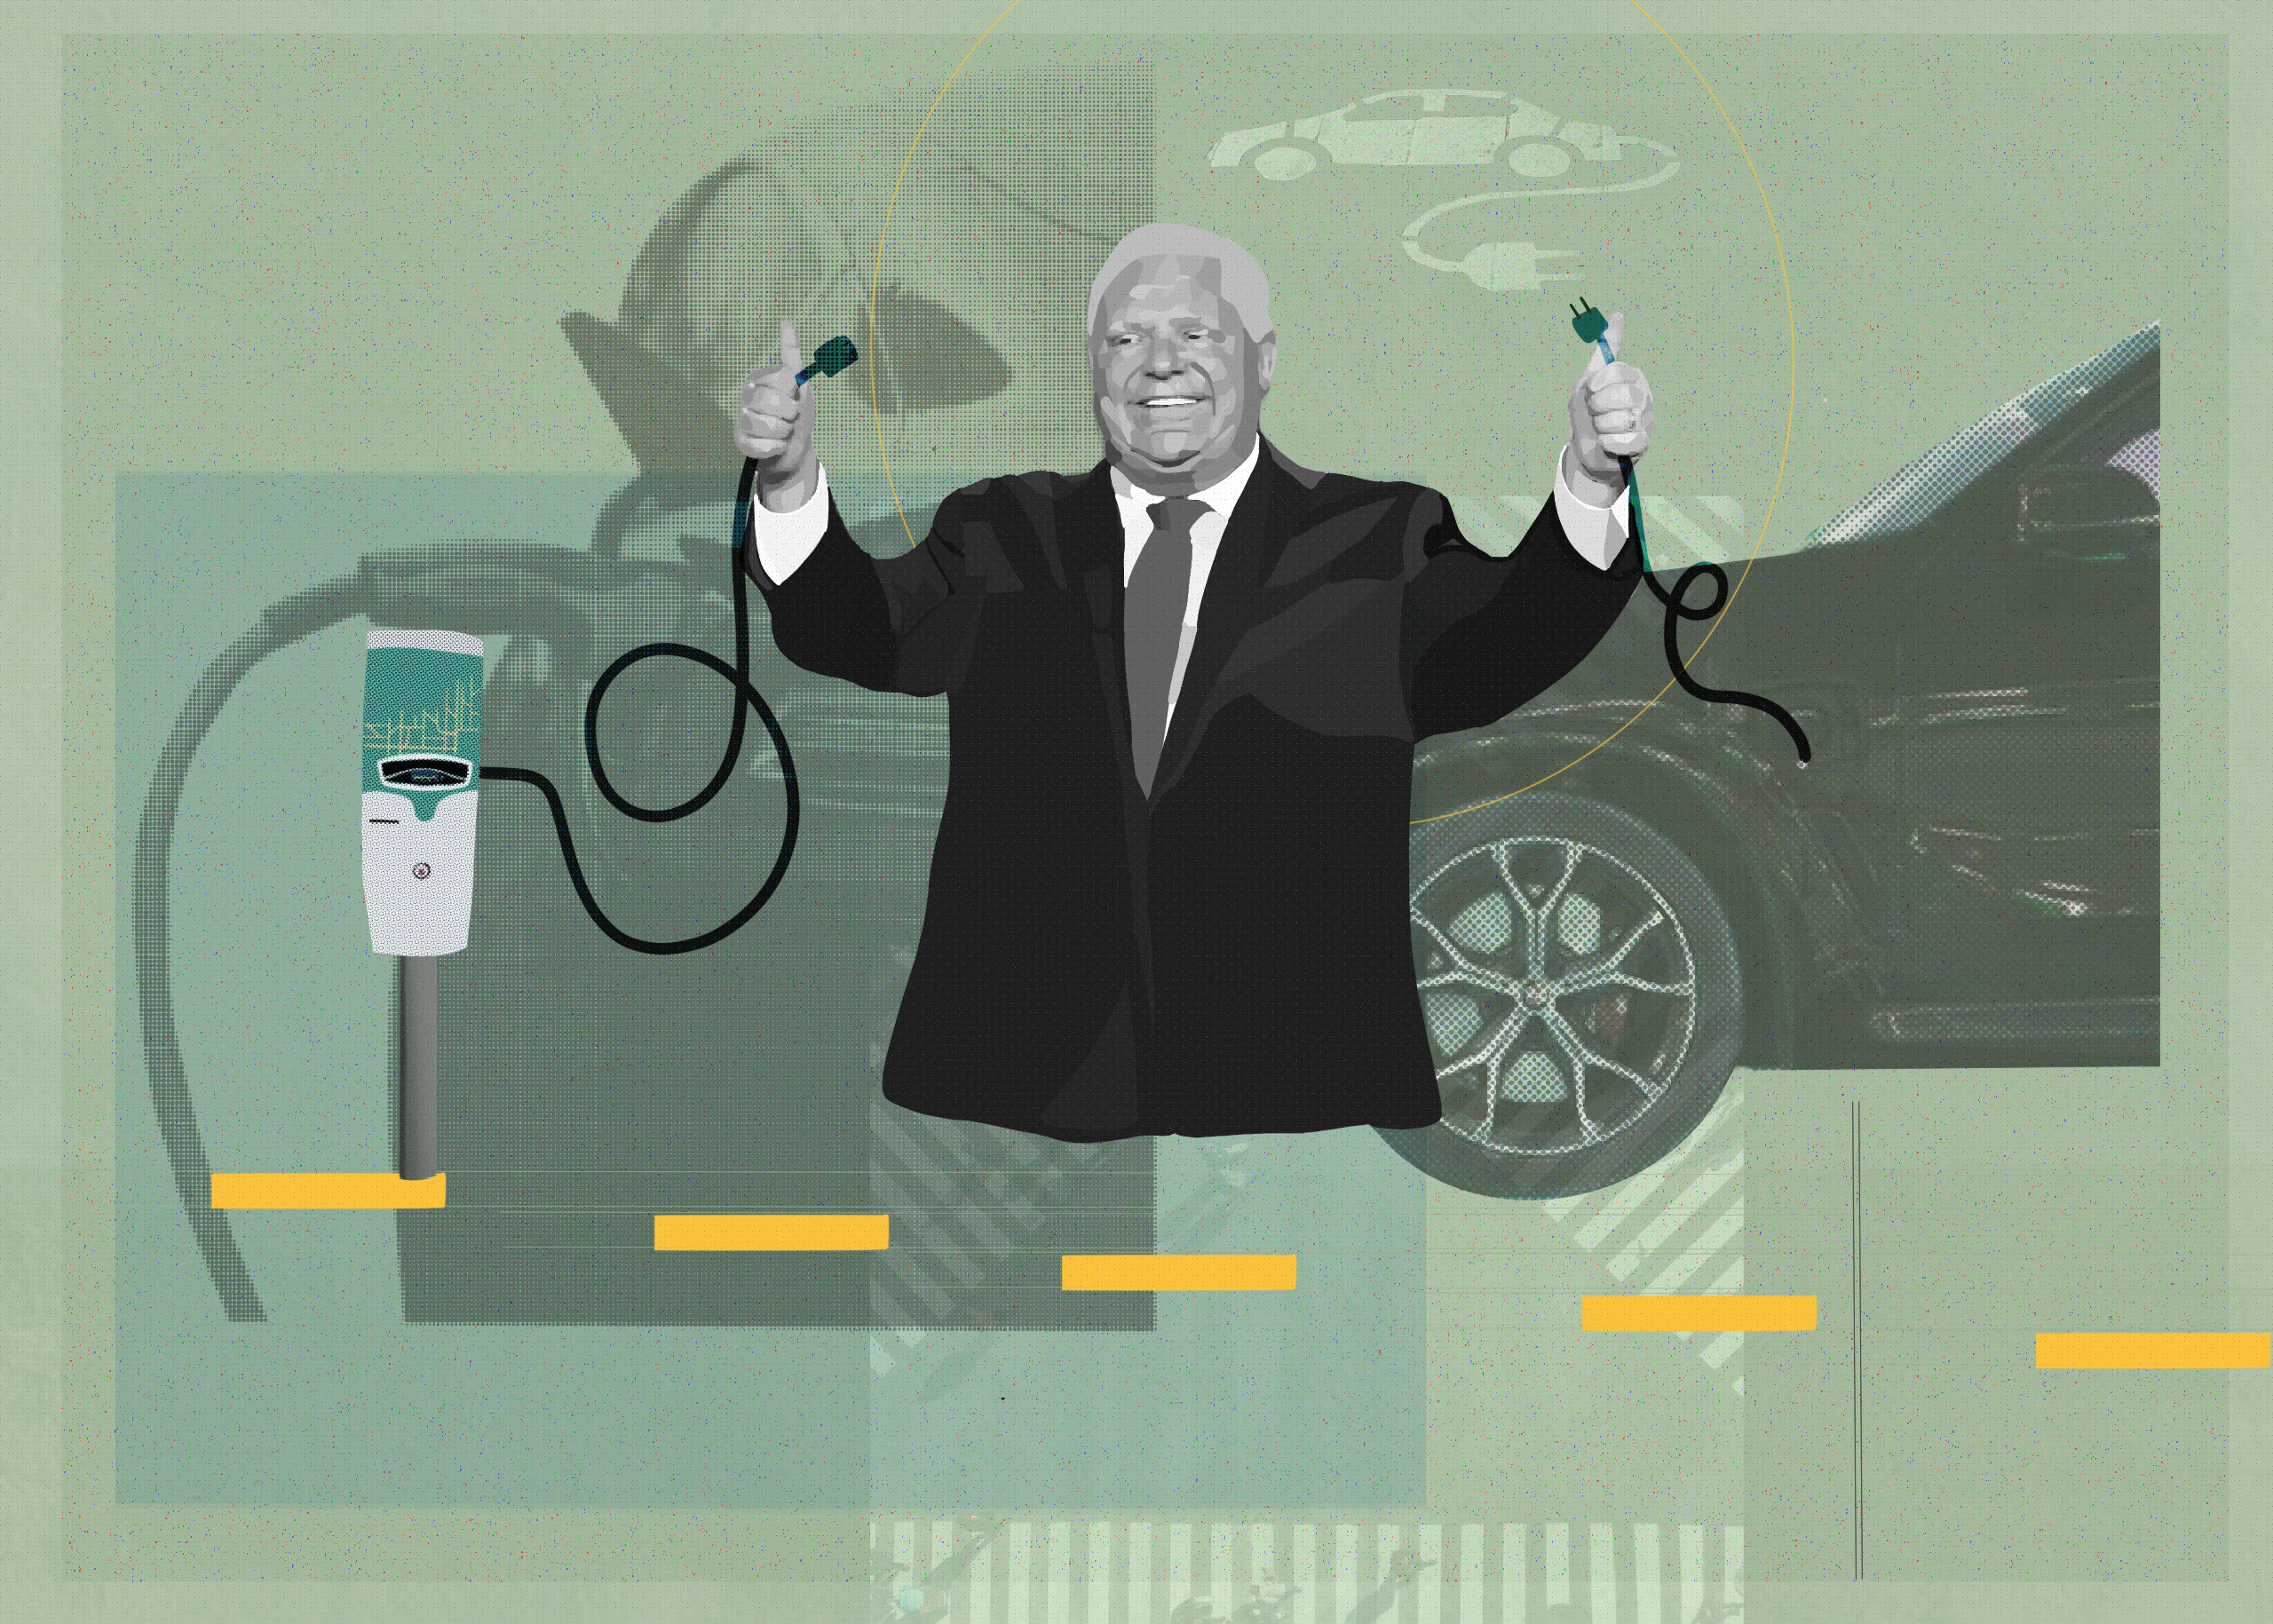 Illustration of Ontario Premier Doug Ford holding charging cables for electric vehicles